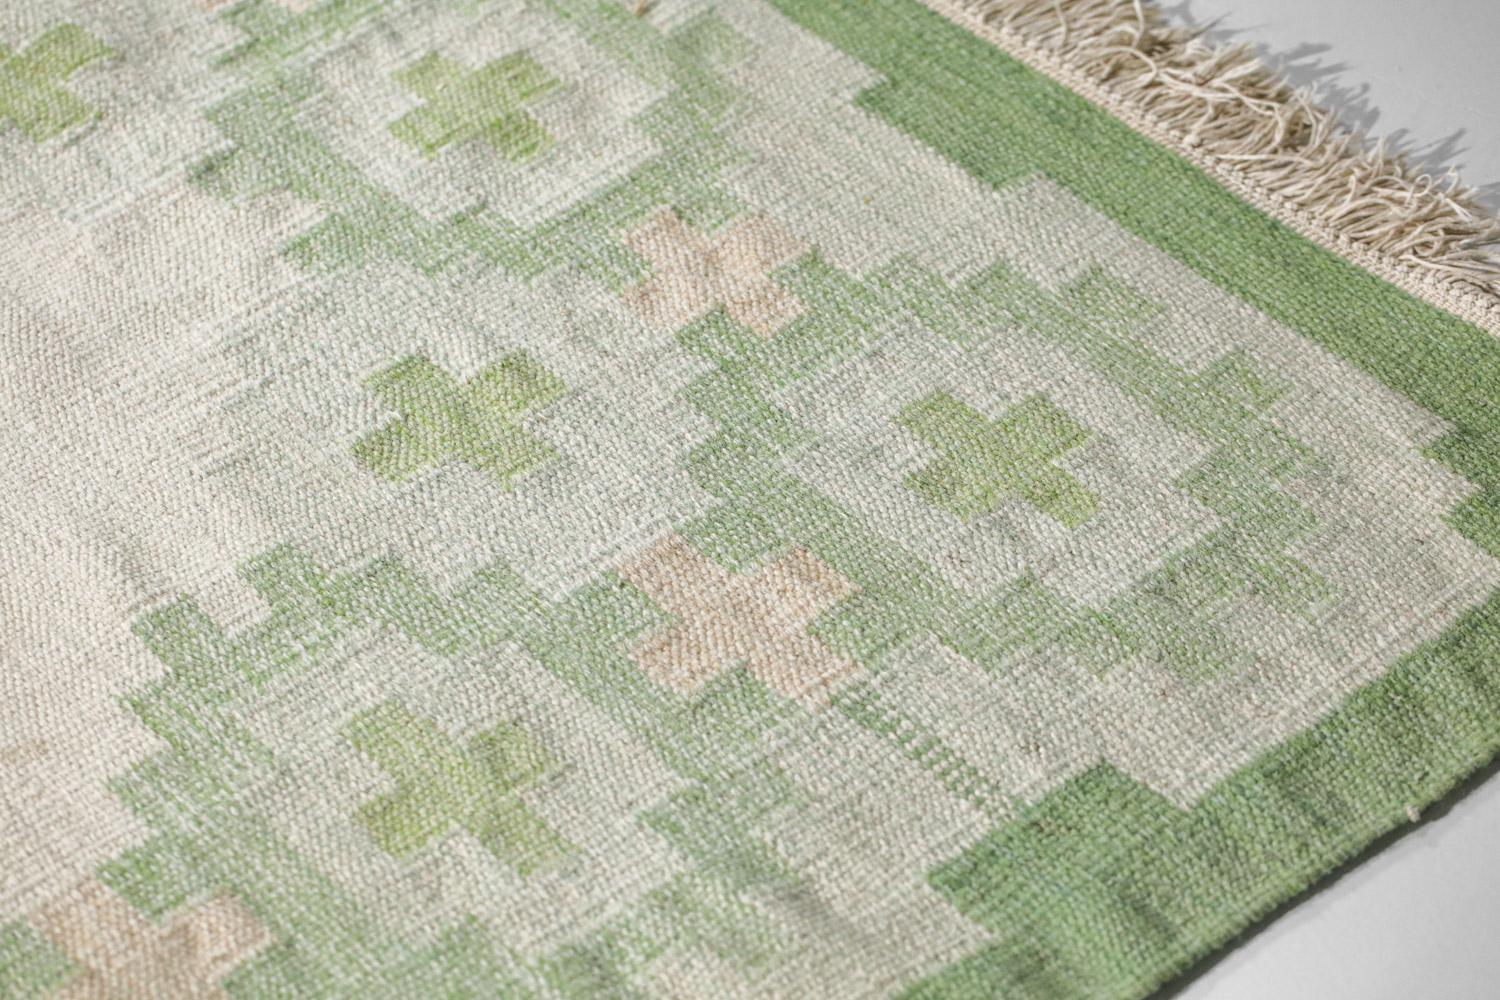 Very large Scandinavian rug from the 1960s. Flat weaving technique (röllakan), wool on linen. Traditional geometrical patterns in green, white and beige colors. Handwoven in Sweden in the 50s and 60s. Excellent vintage condition (see photos).